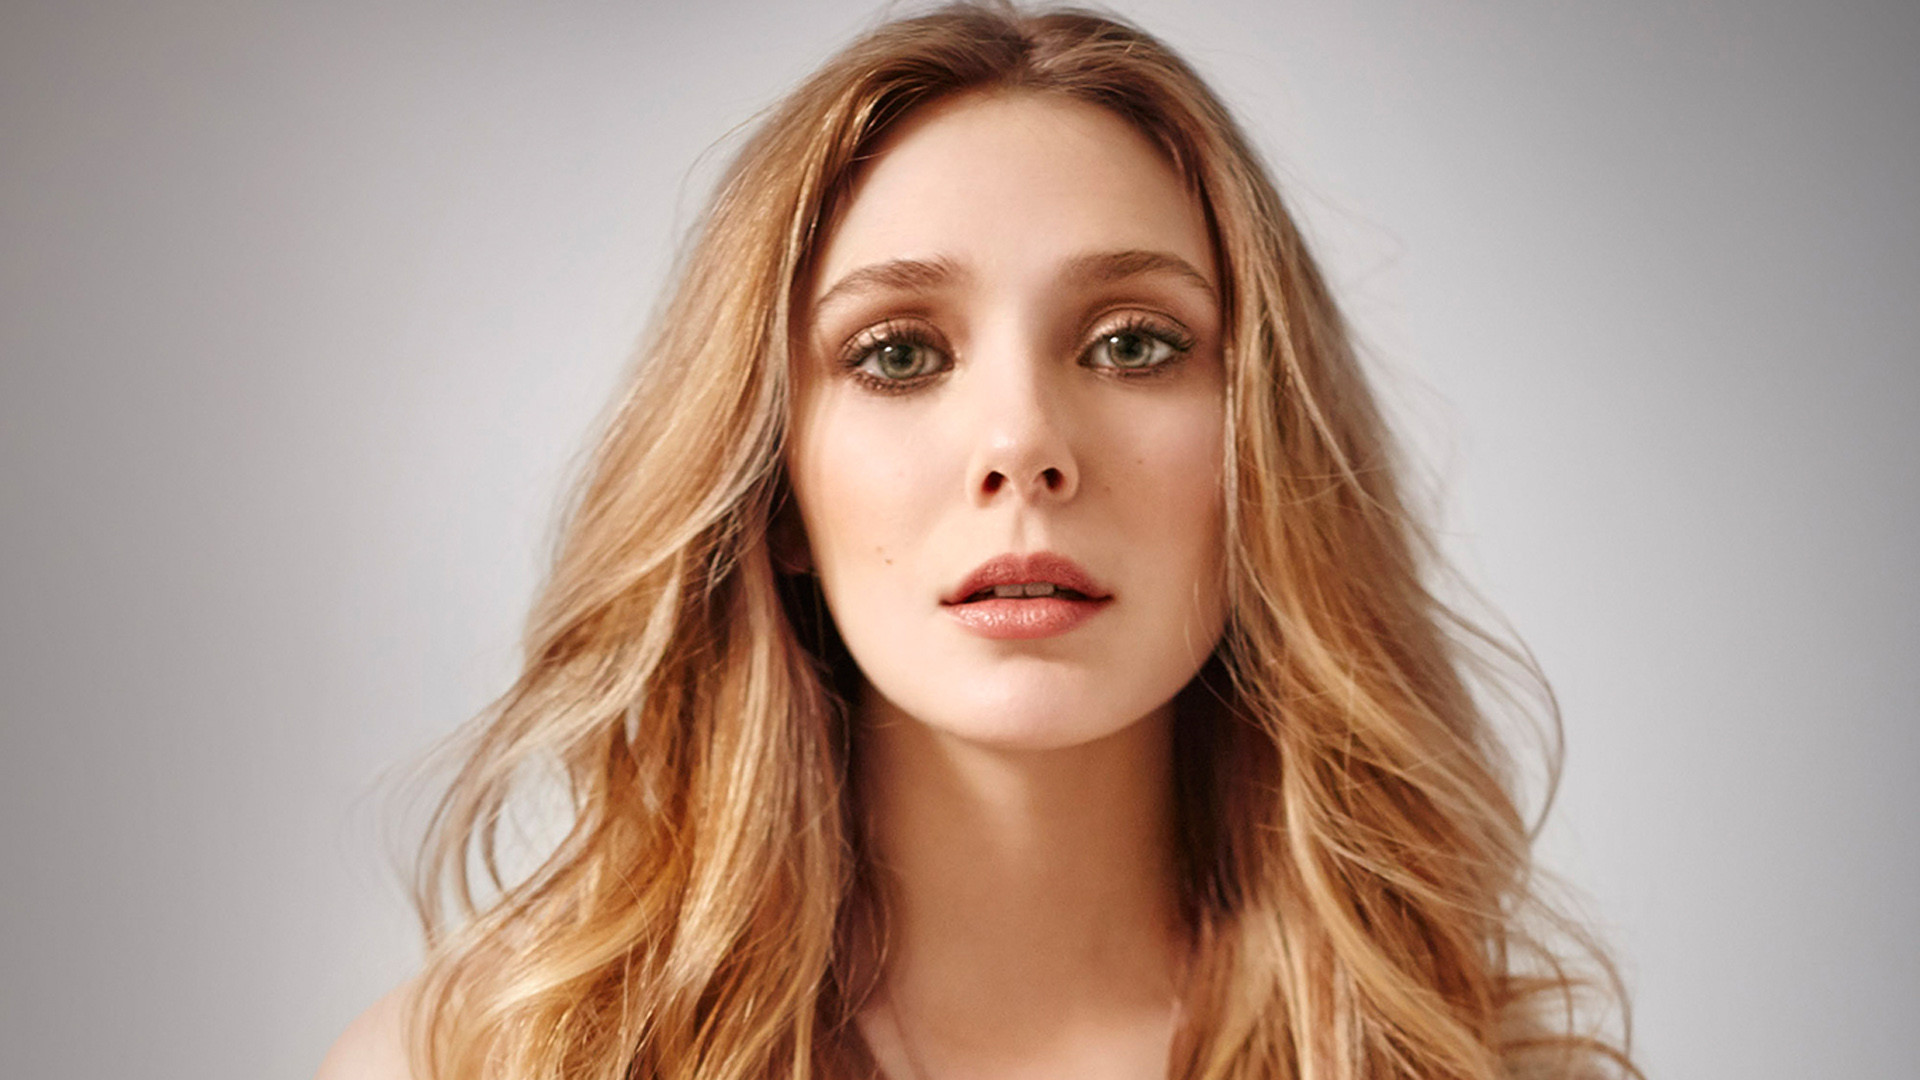 Elizabeth Olsen turns 32 today! Happy birthday to our talented, talented queen! 